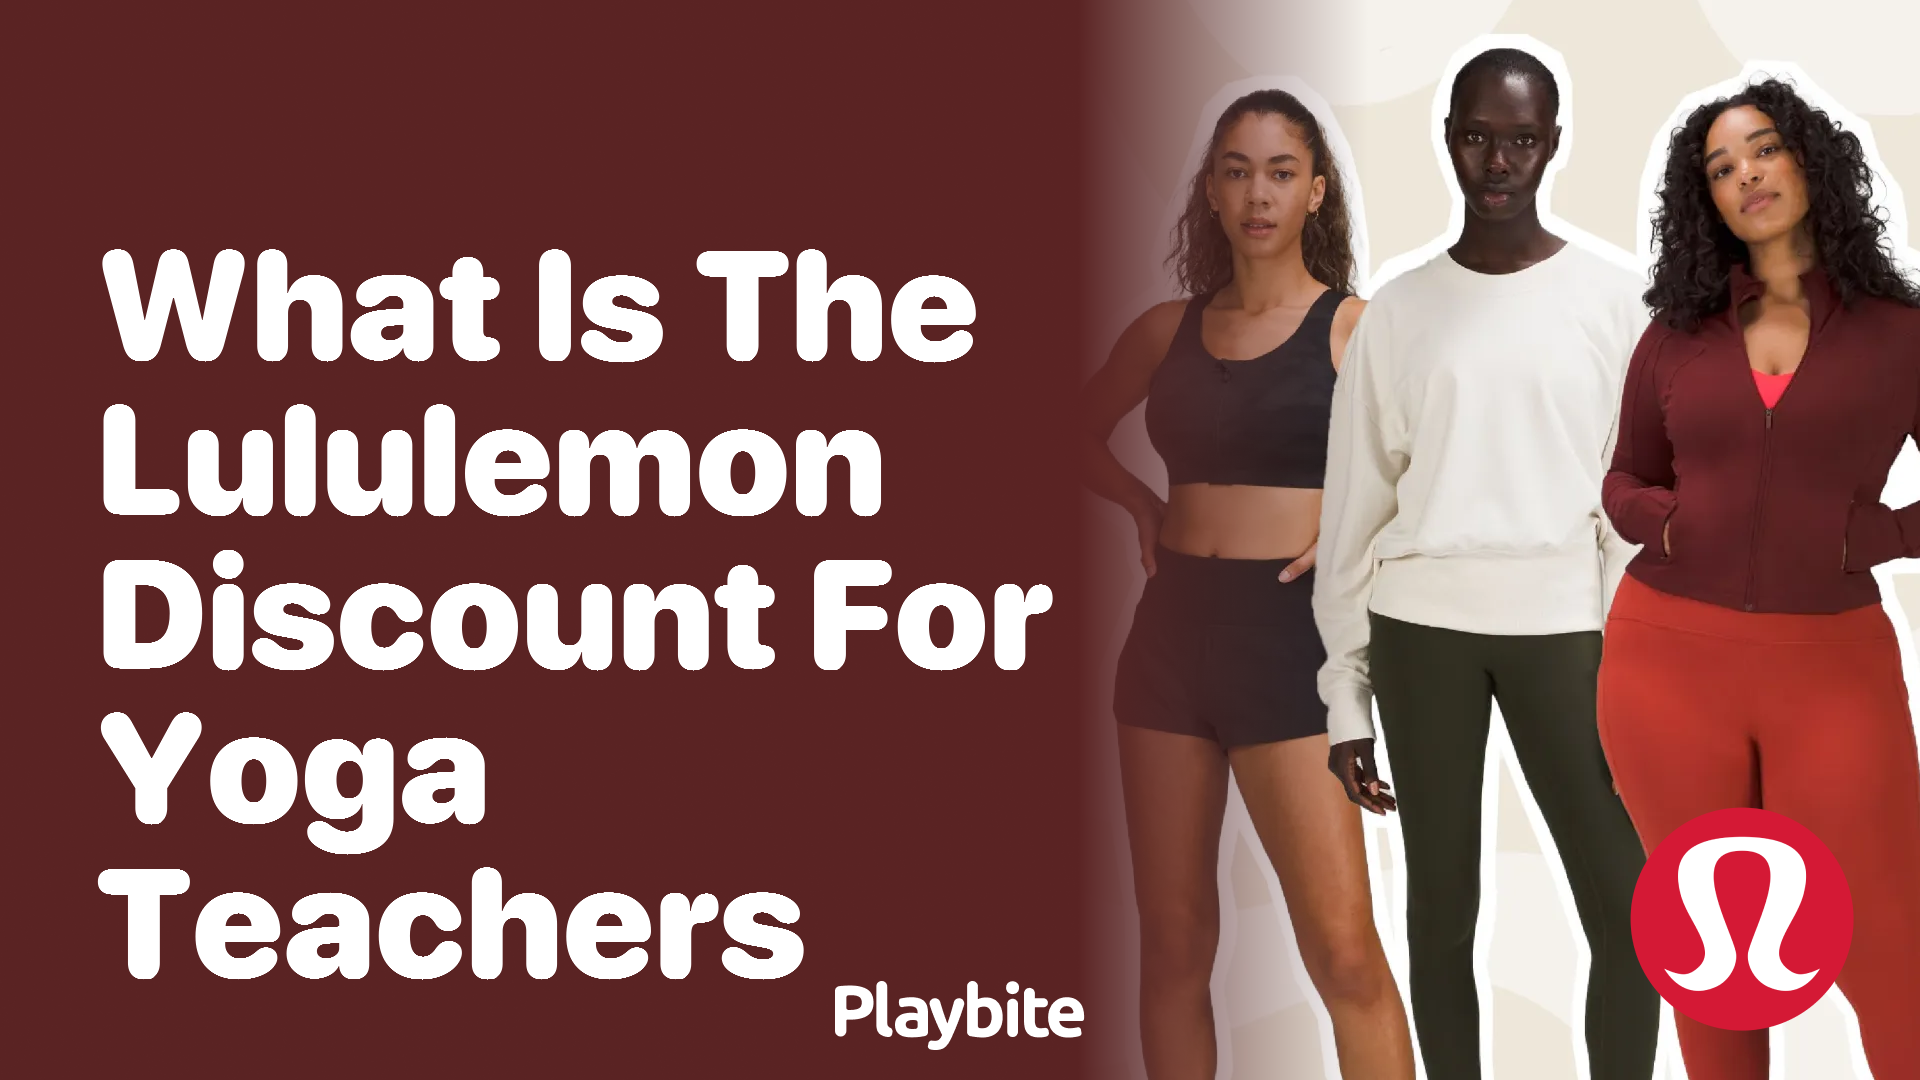 What is the Lululemon Discount for Yoga Teachers? - Playbite